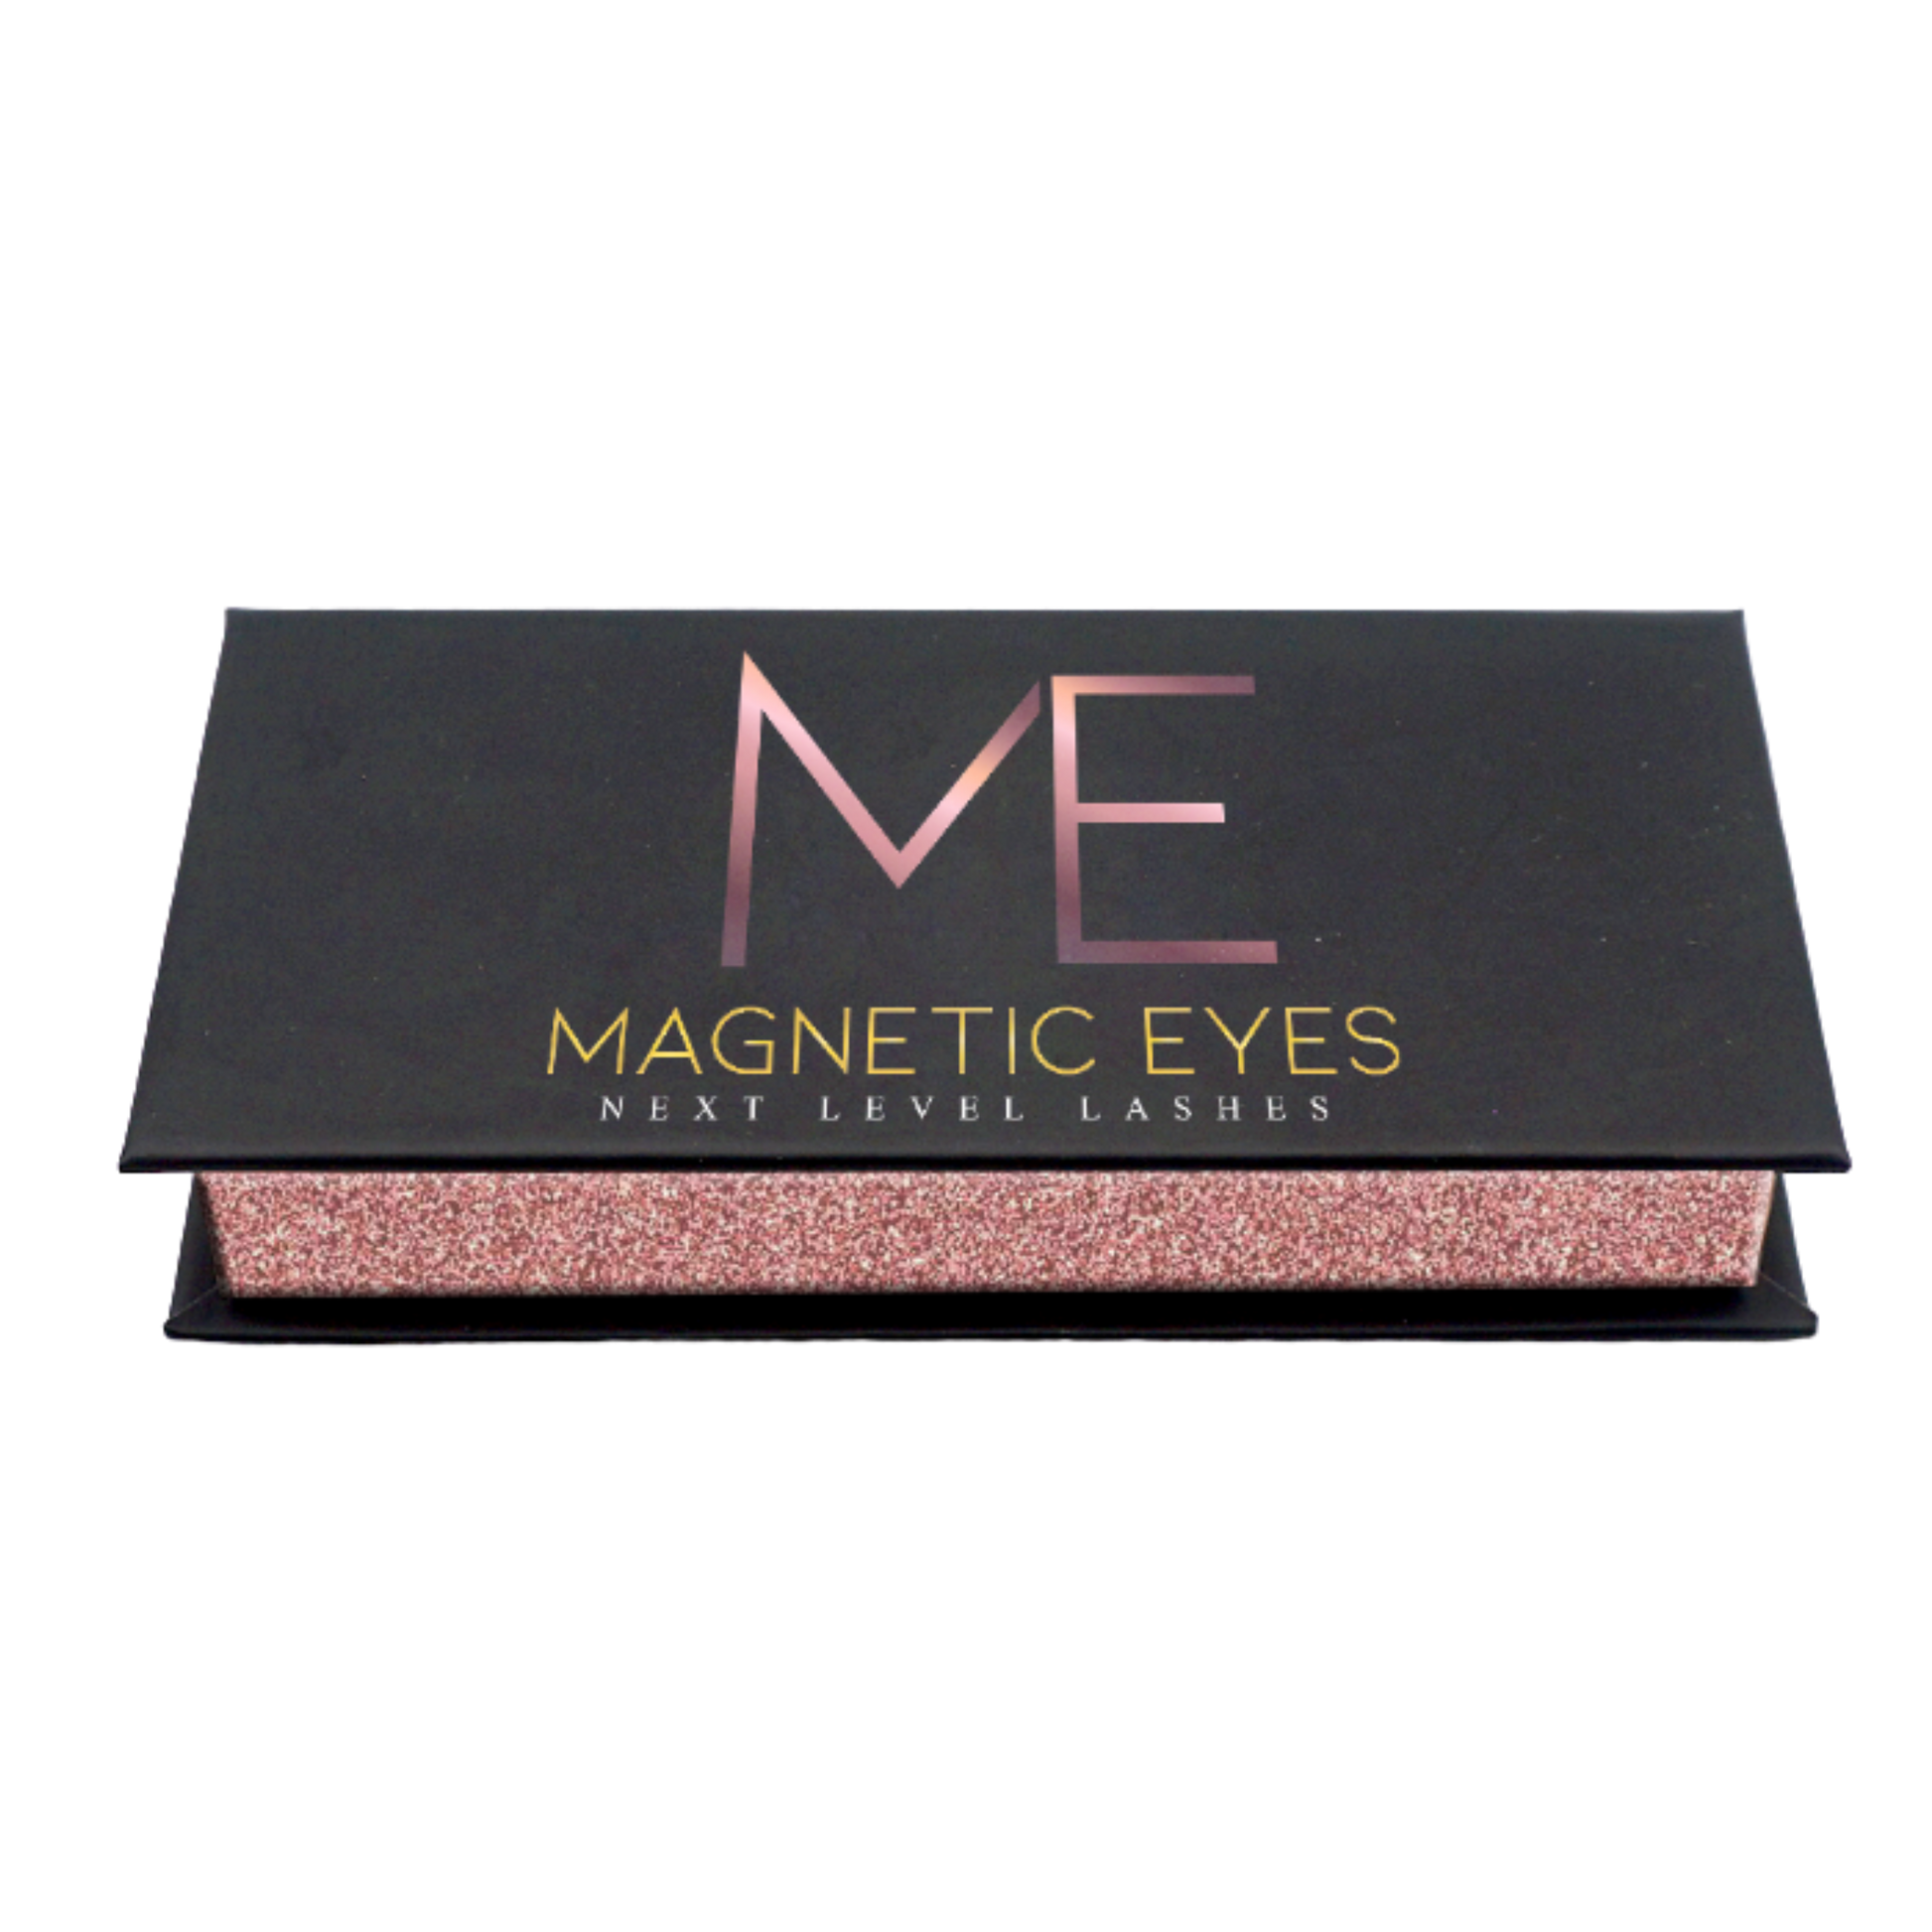 The Mysterious (2.1)  No one really knows where she fits in, she can be easily overlooked But she will surprise you with her good looks and charm.    Best suited for round eyes, mono-lid or Almond eyes!